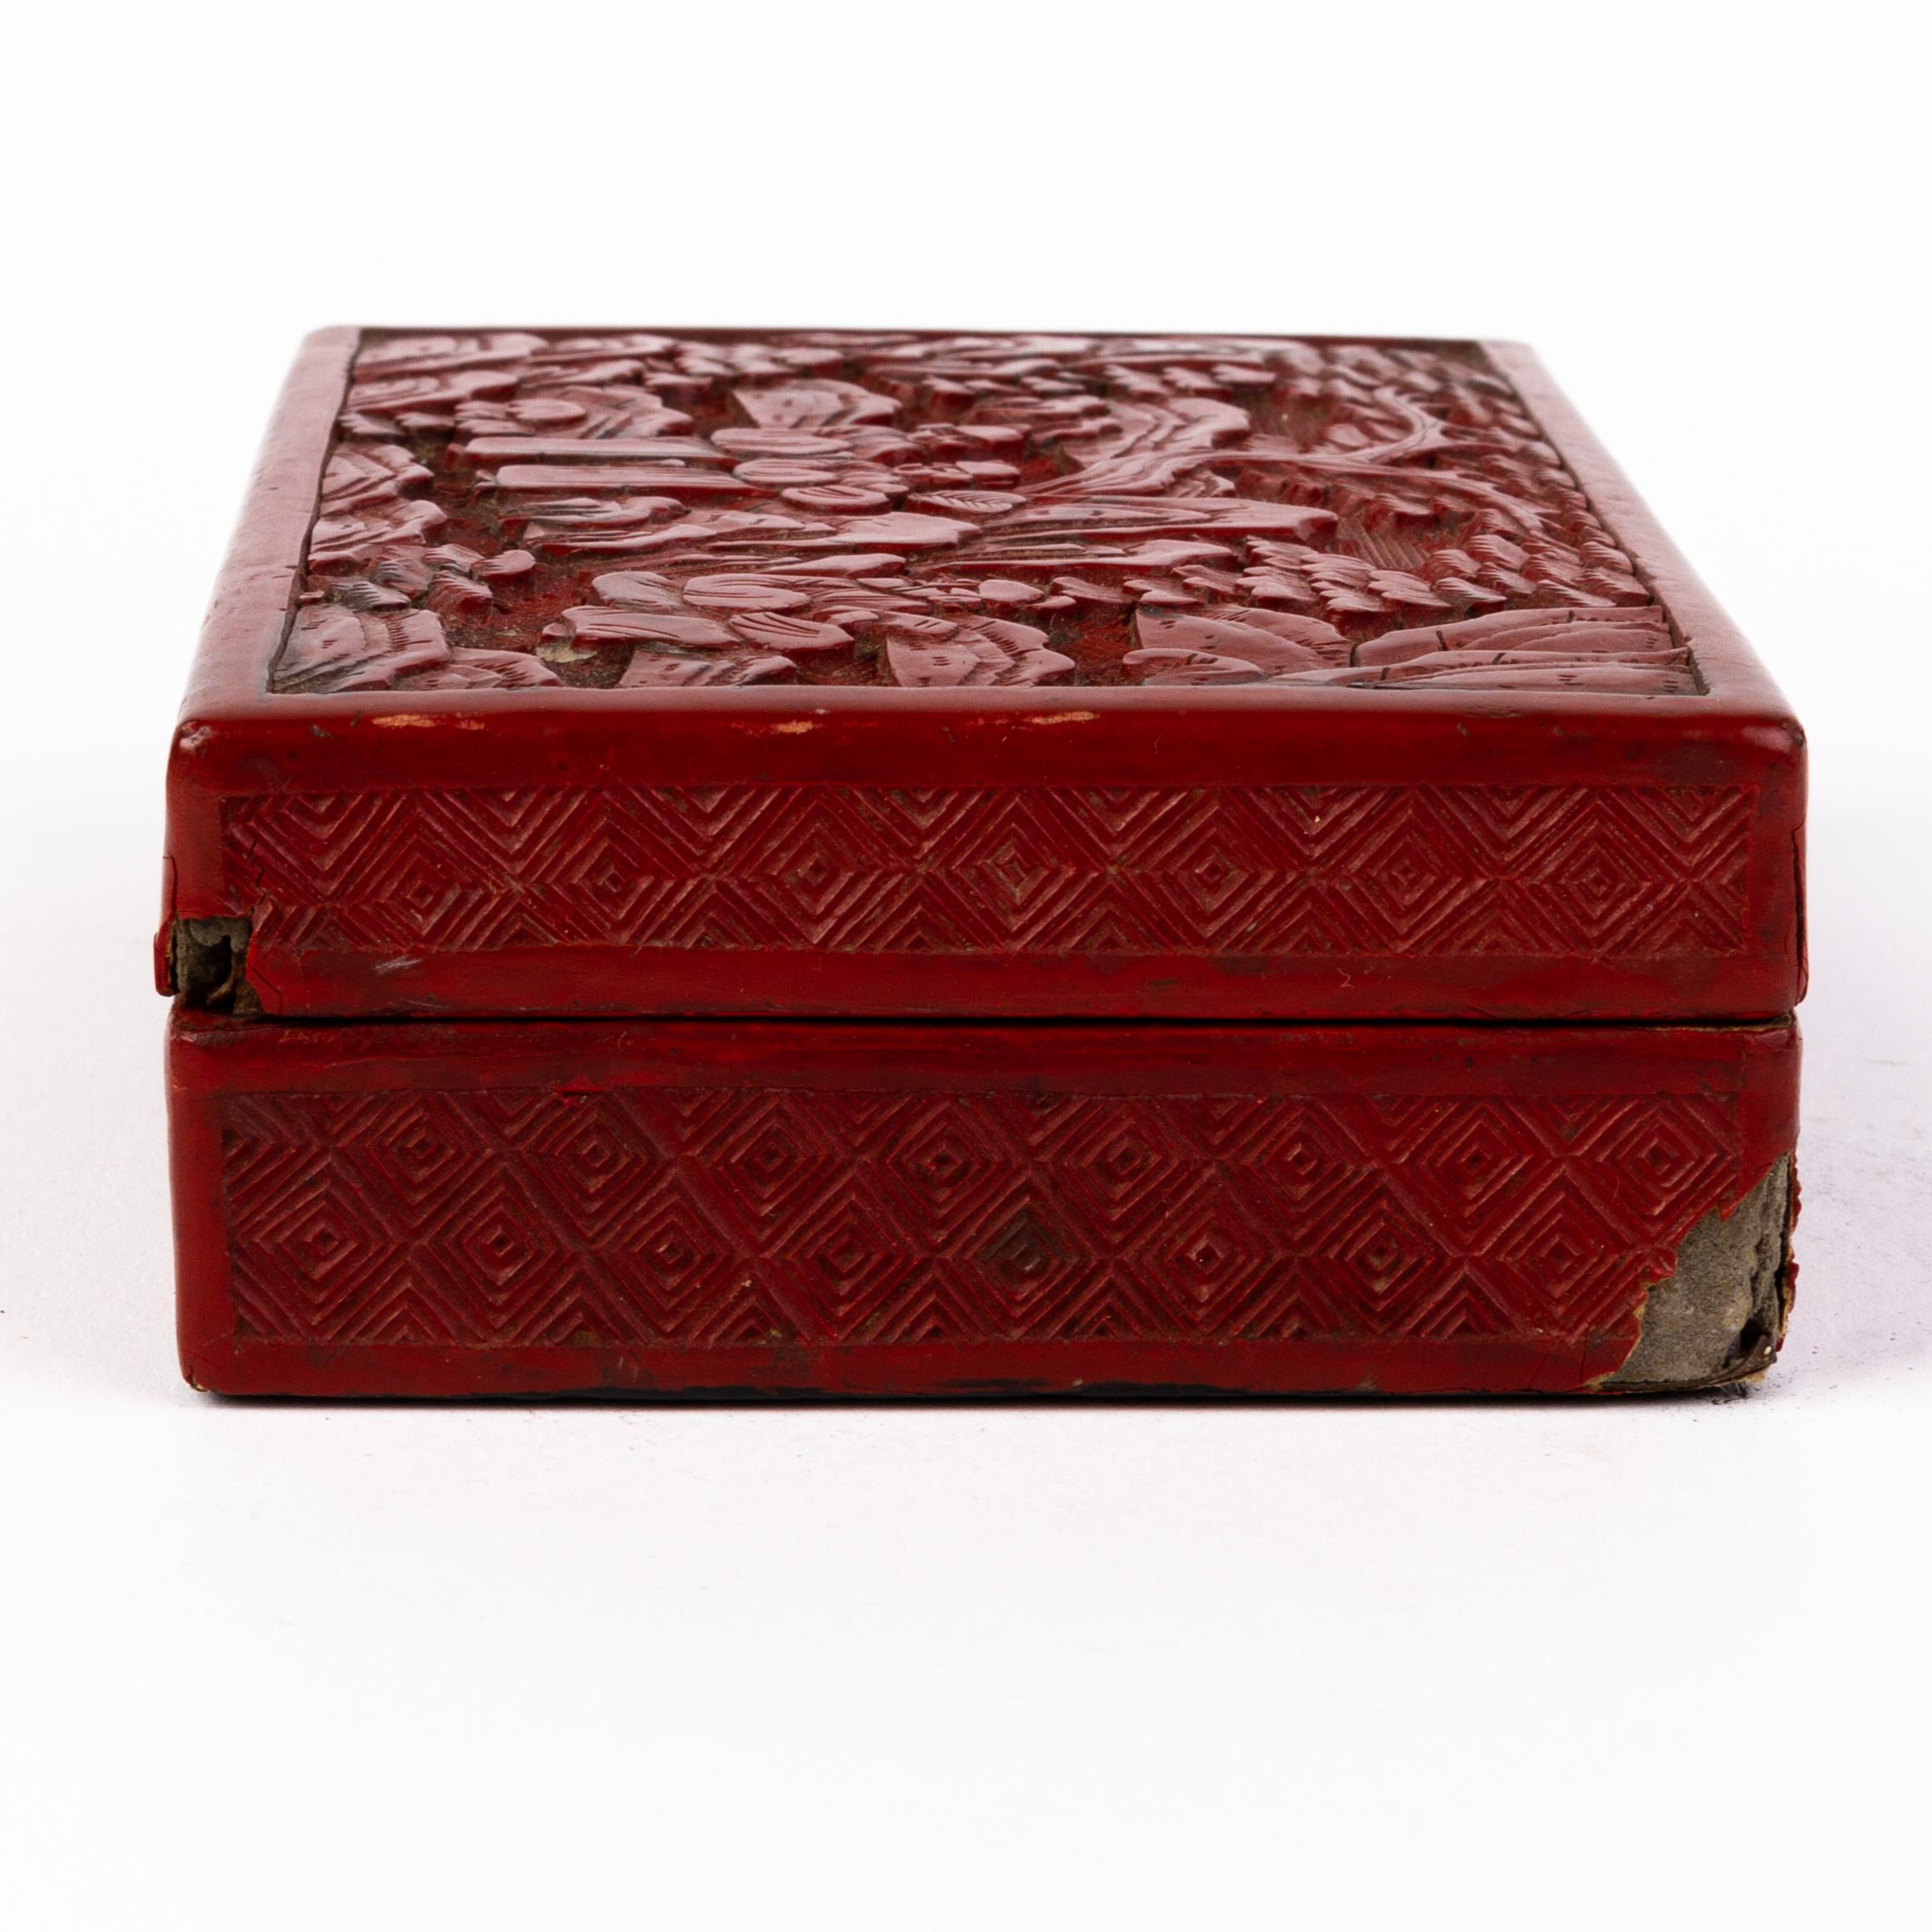 19th Century Chinese Qing Dynasty Carved Cinnabar Lacquer Box & Cover